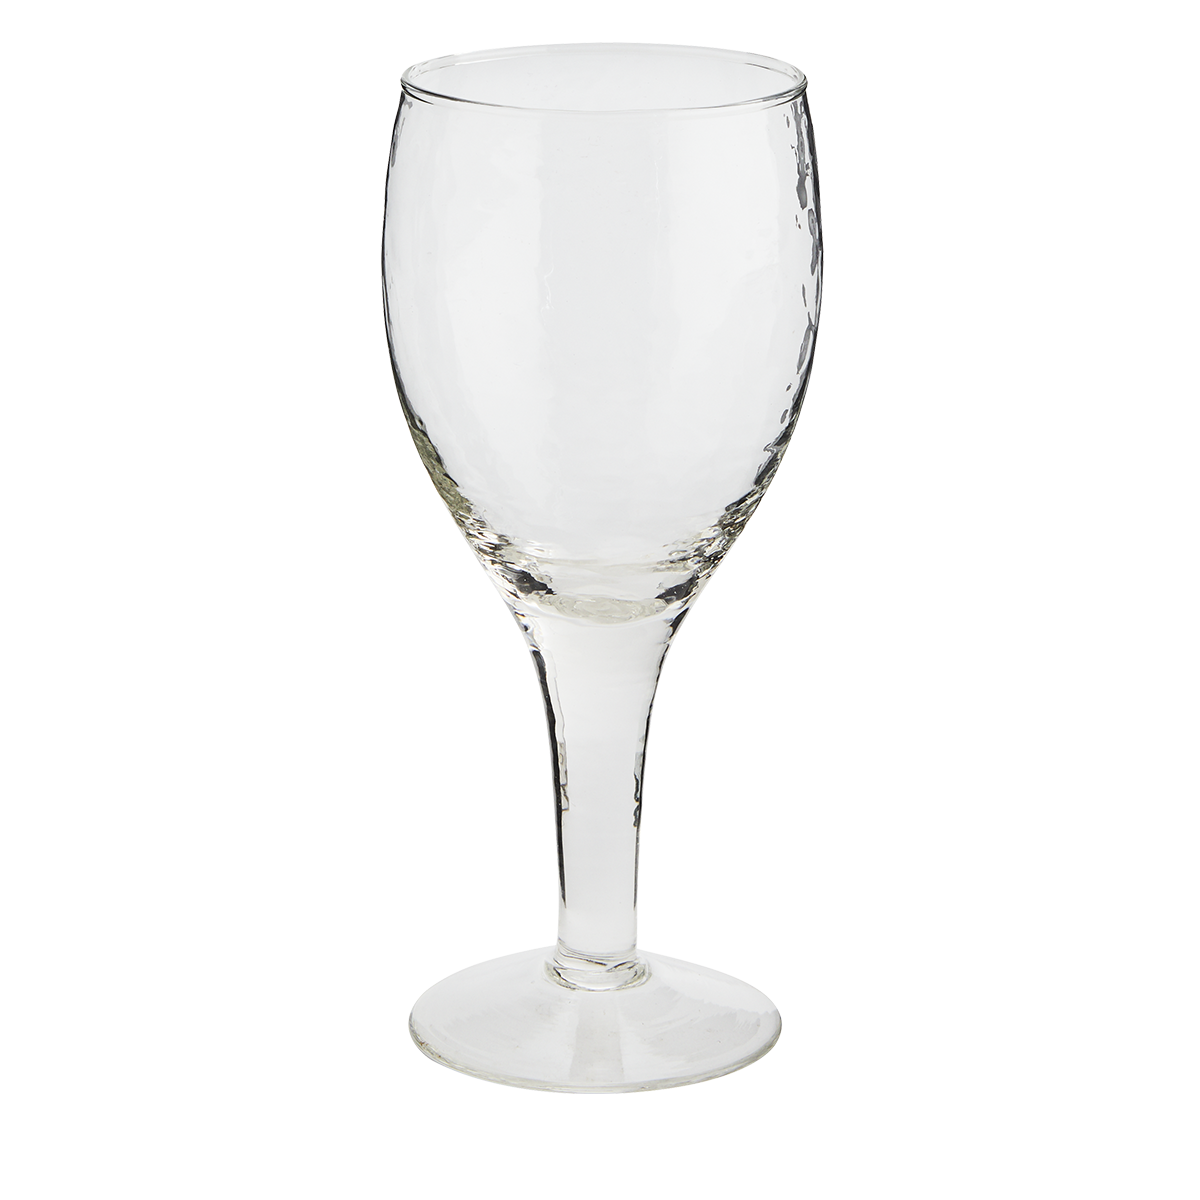 Hammered red wine glass